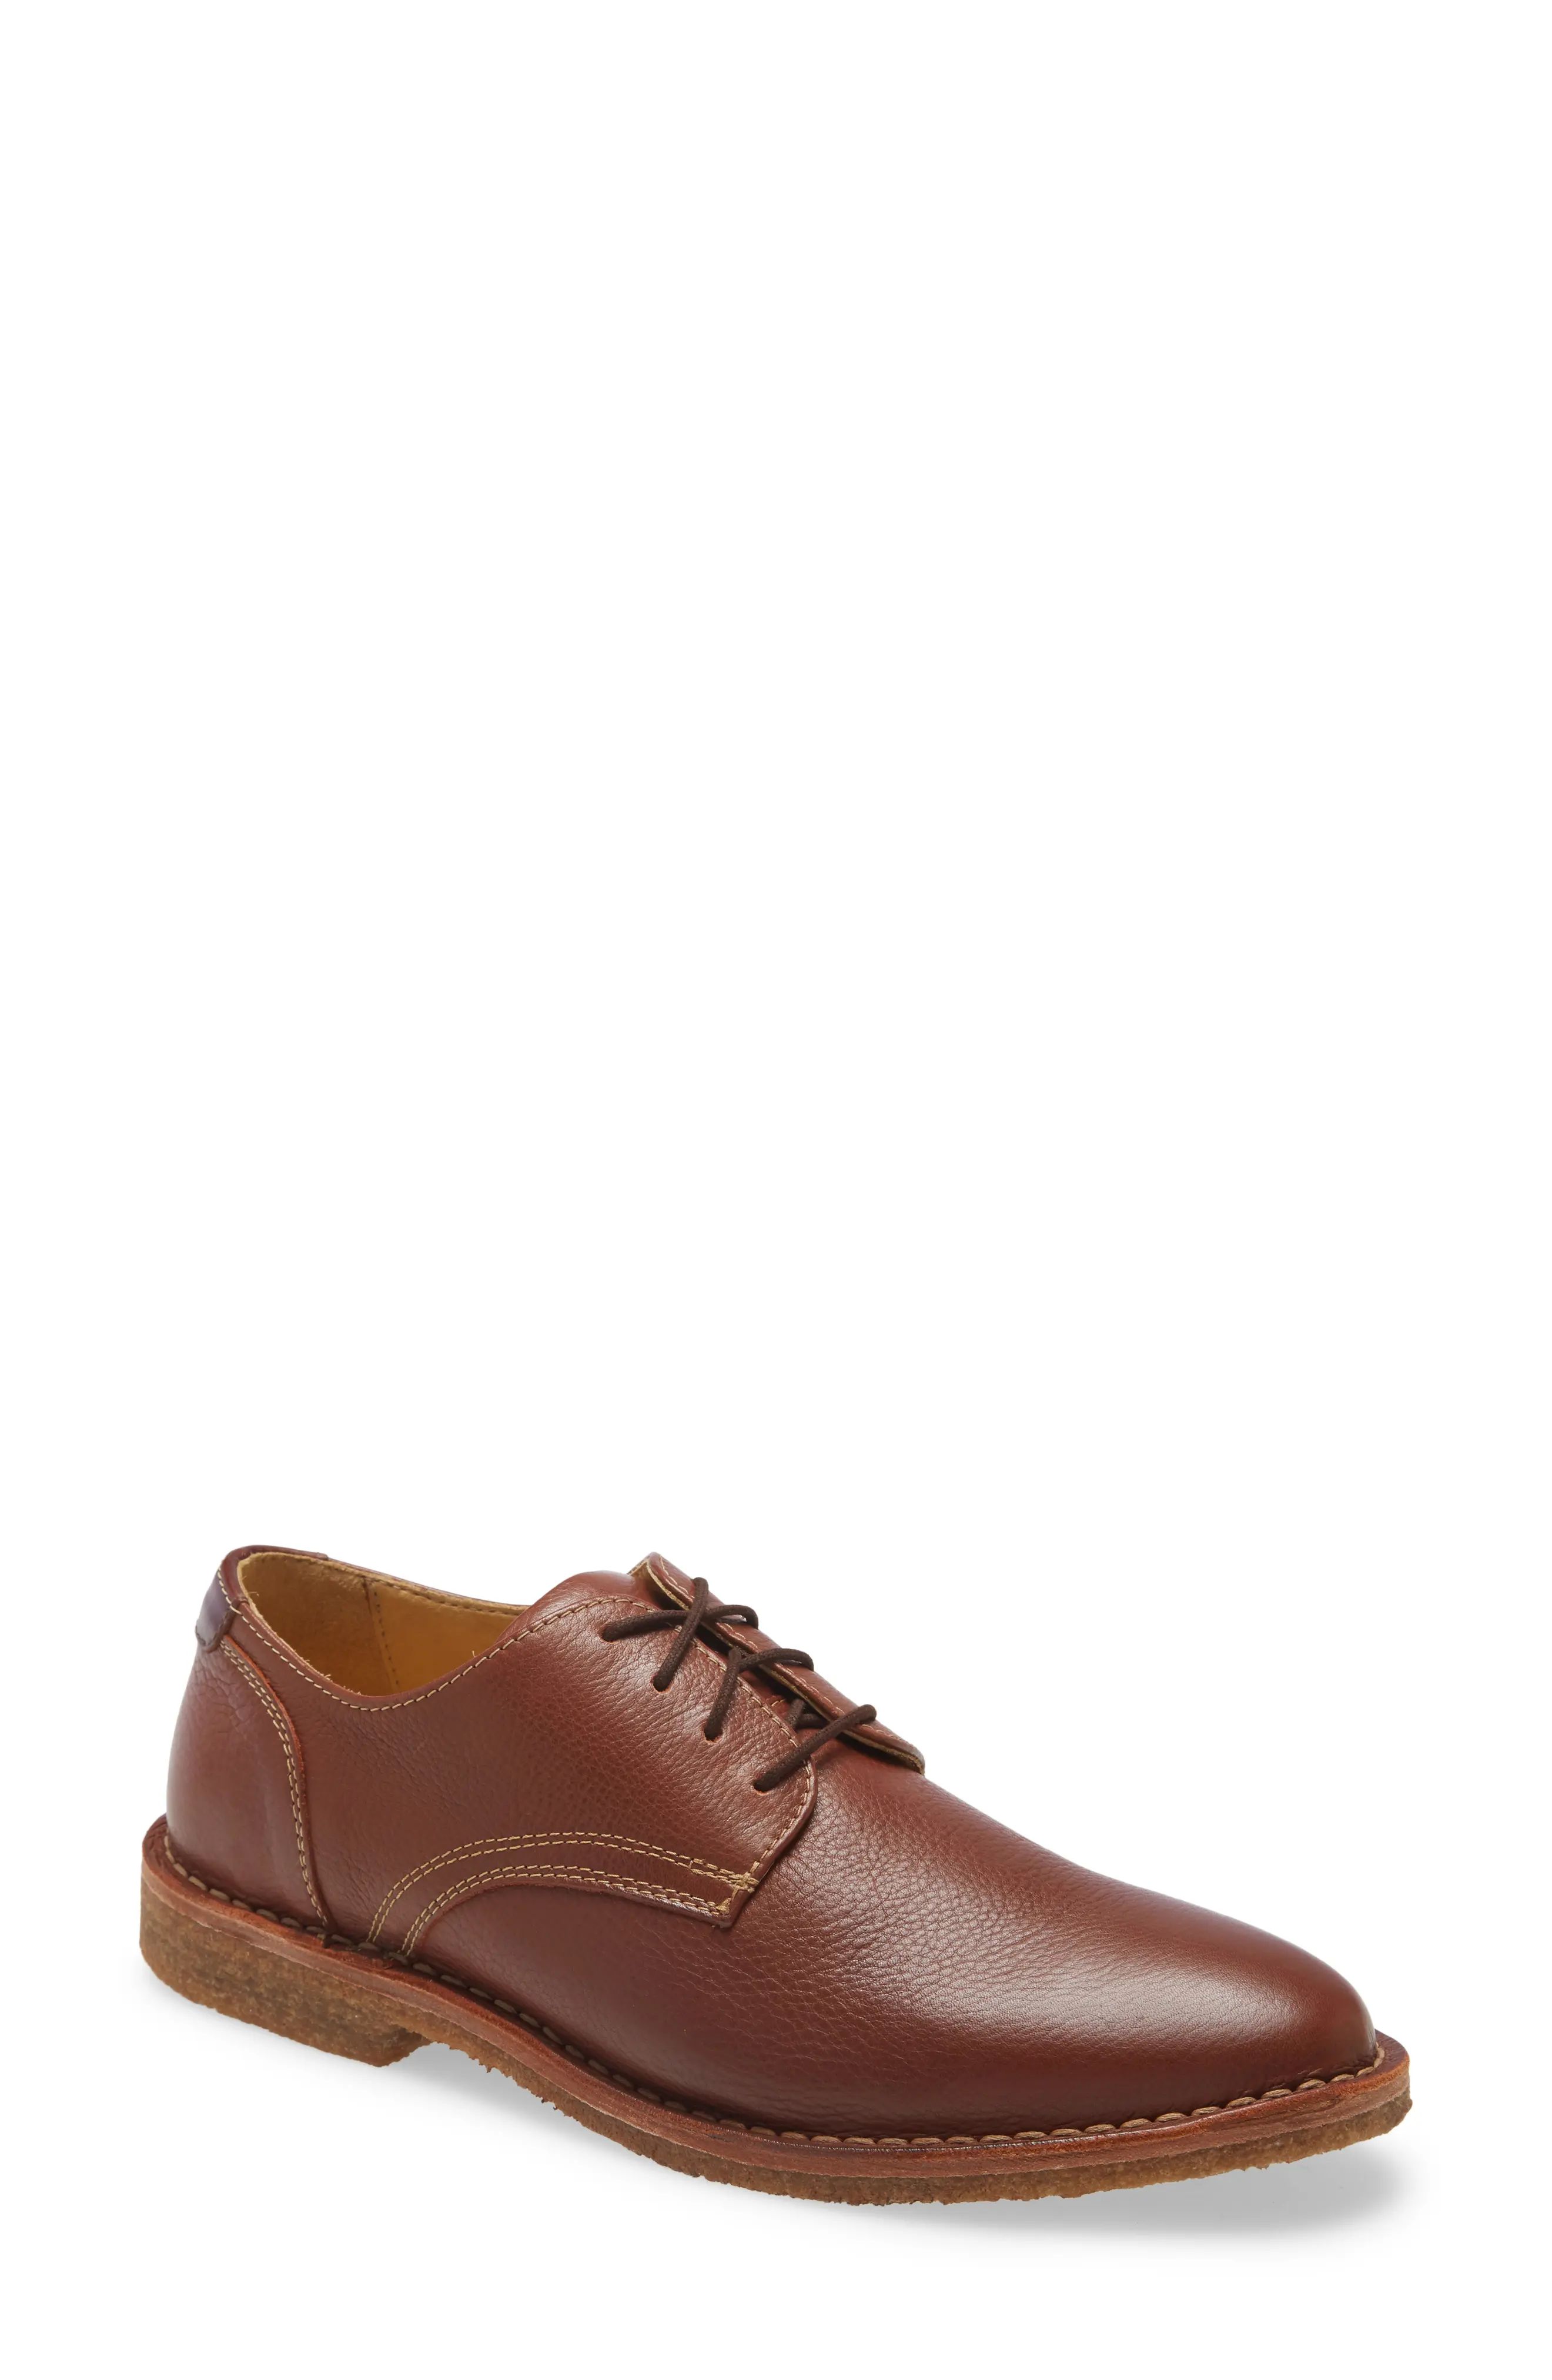 Johnston & Murphy Donnelson Plain Toe Oxford, Size 12 in Mahogany at Nordstrom | Nordstrom